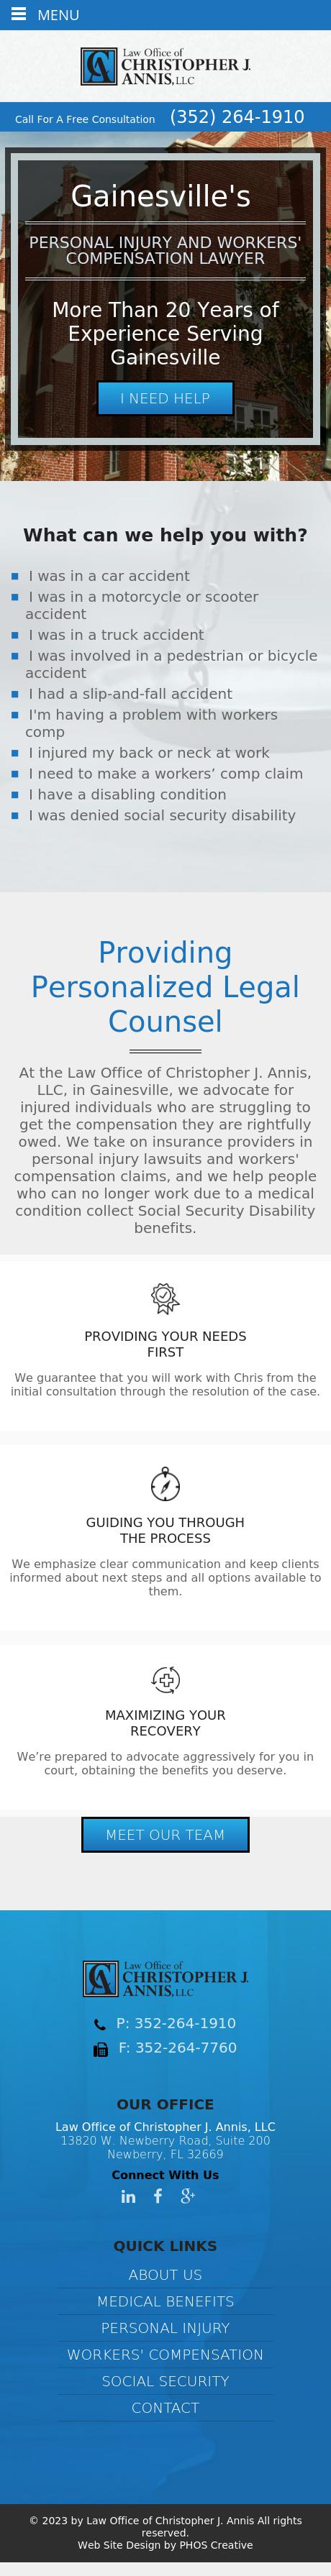 Law Office of Christopher J. Annis, LLC - Gainesville FL Lawyers